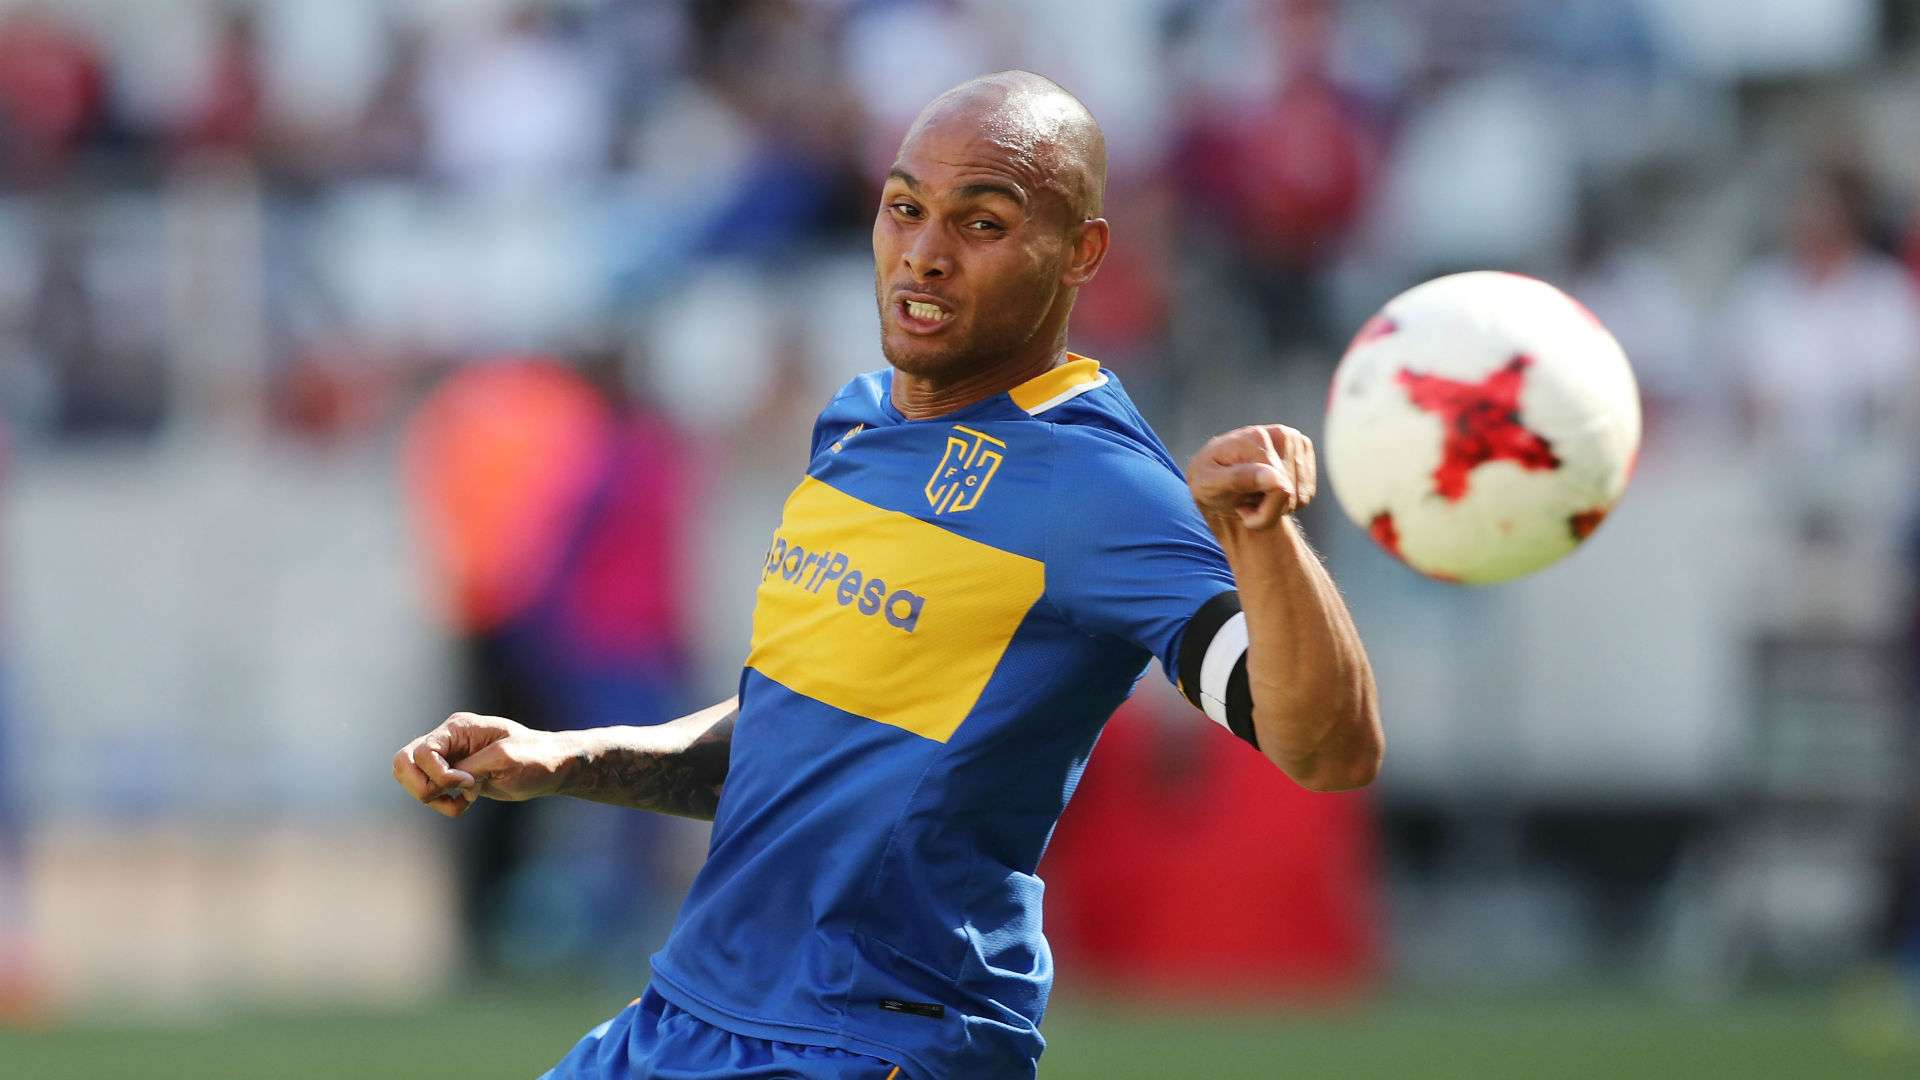 Robyn Johannes of Cape Town City